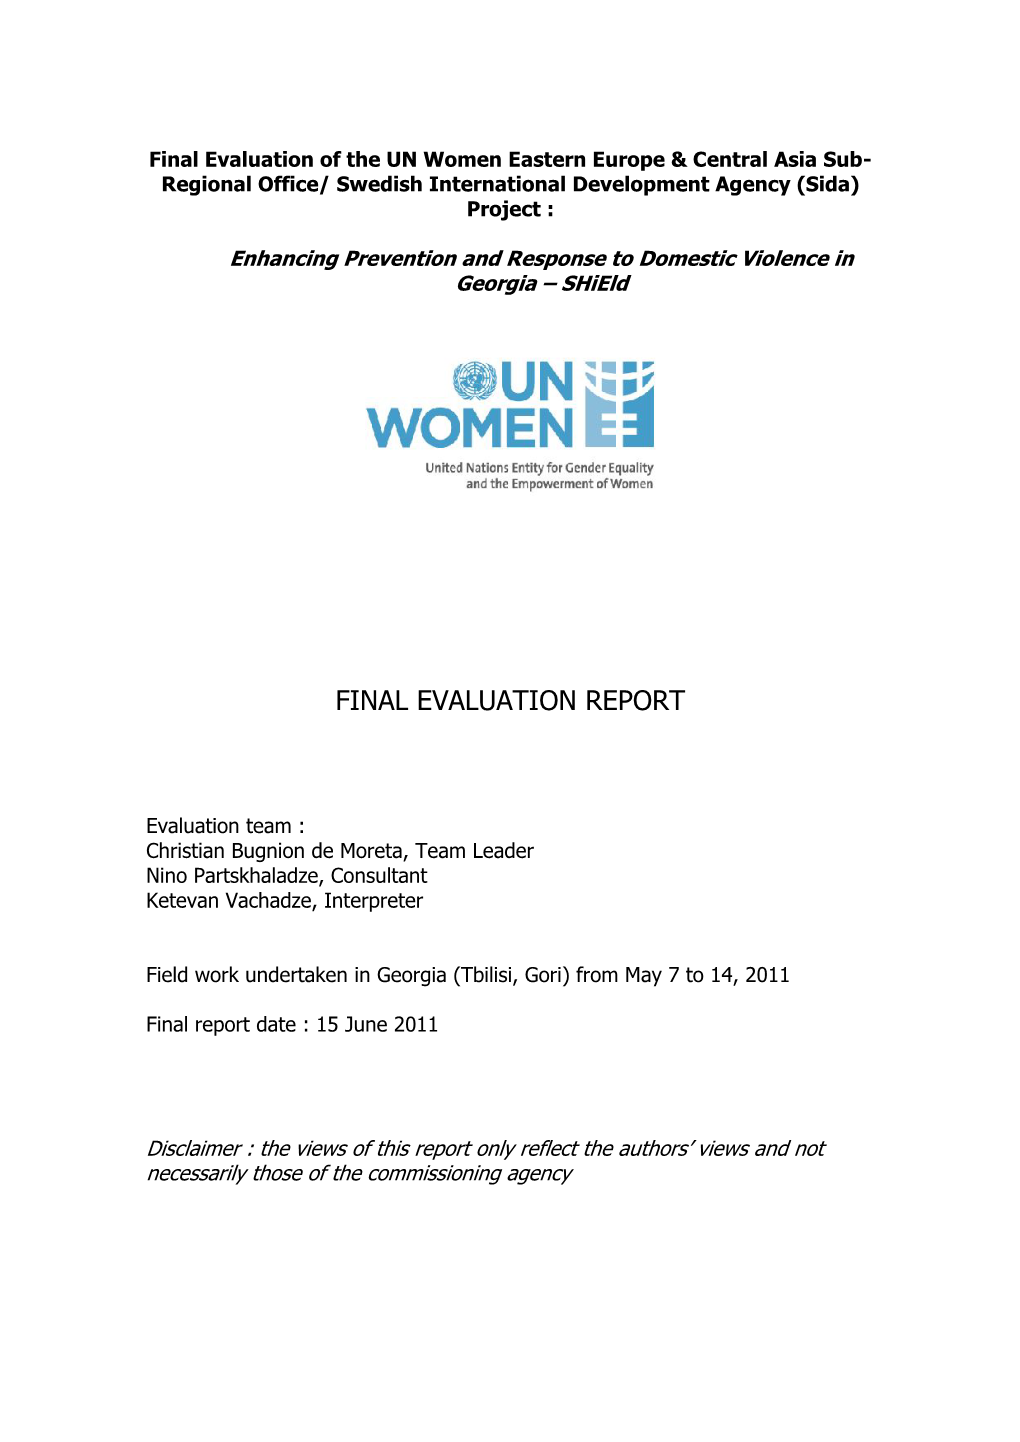 Final Evaluation of the UN WOMEN Eastern Europe & Central Asia Sub-Regional Office